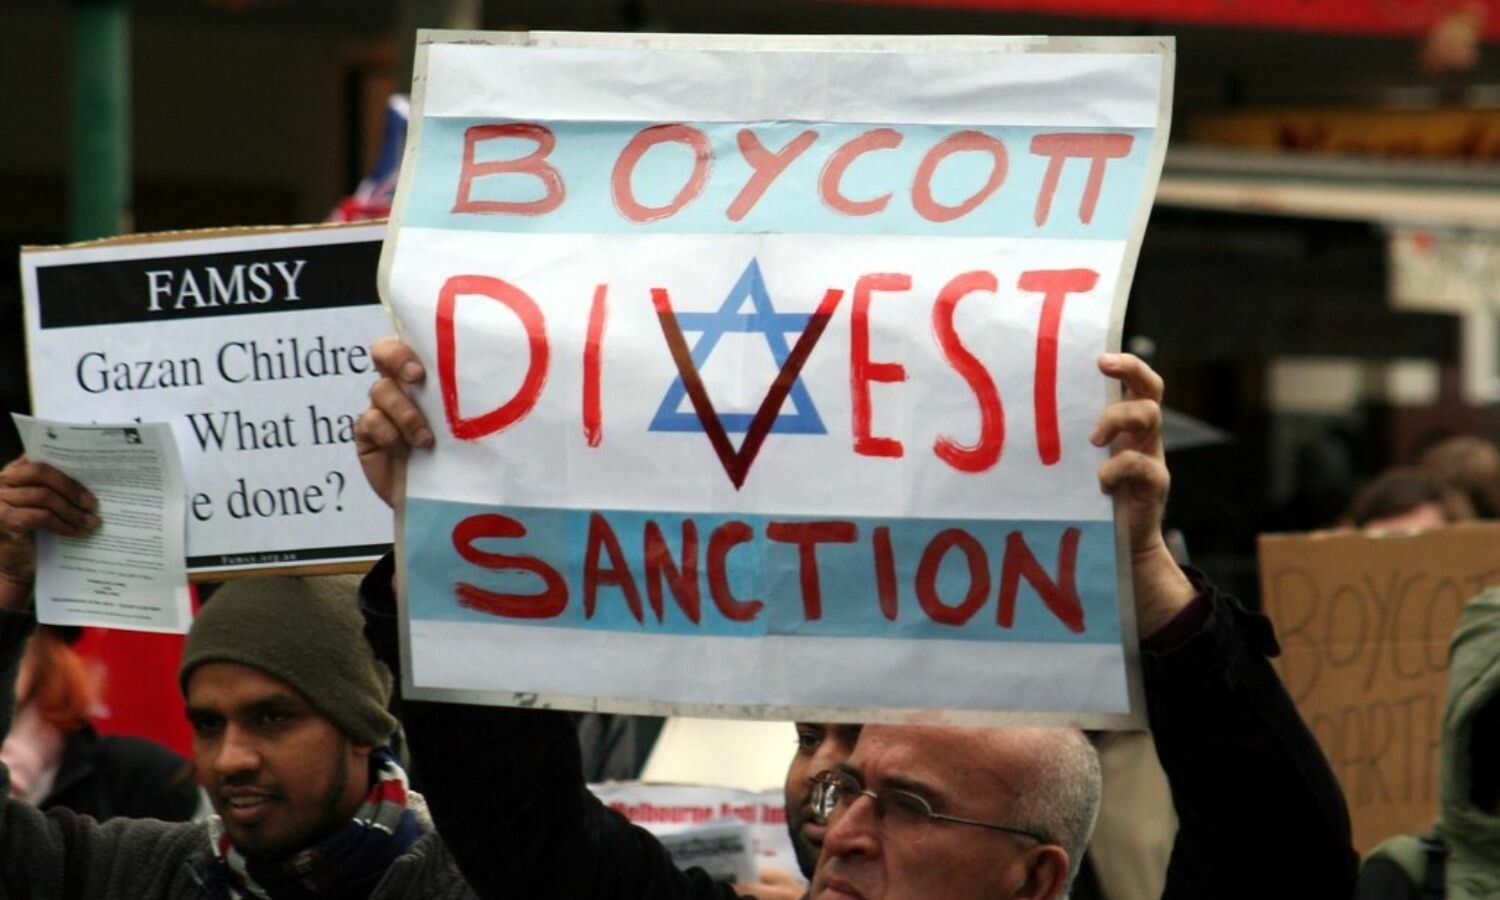 A man holding an Israeli flag with the words "Boycott, Divest, Sanction" on each of the three stripes. The 'v' in "Divest" goes right over the Star of David.